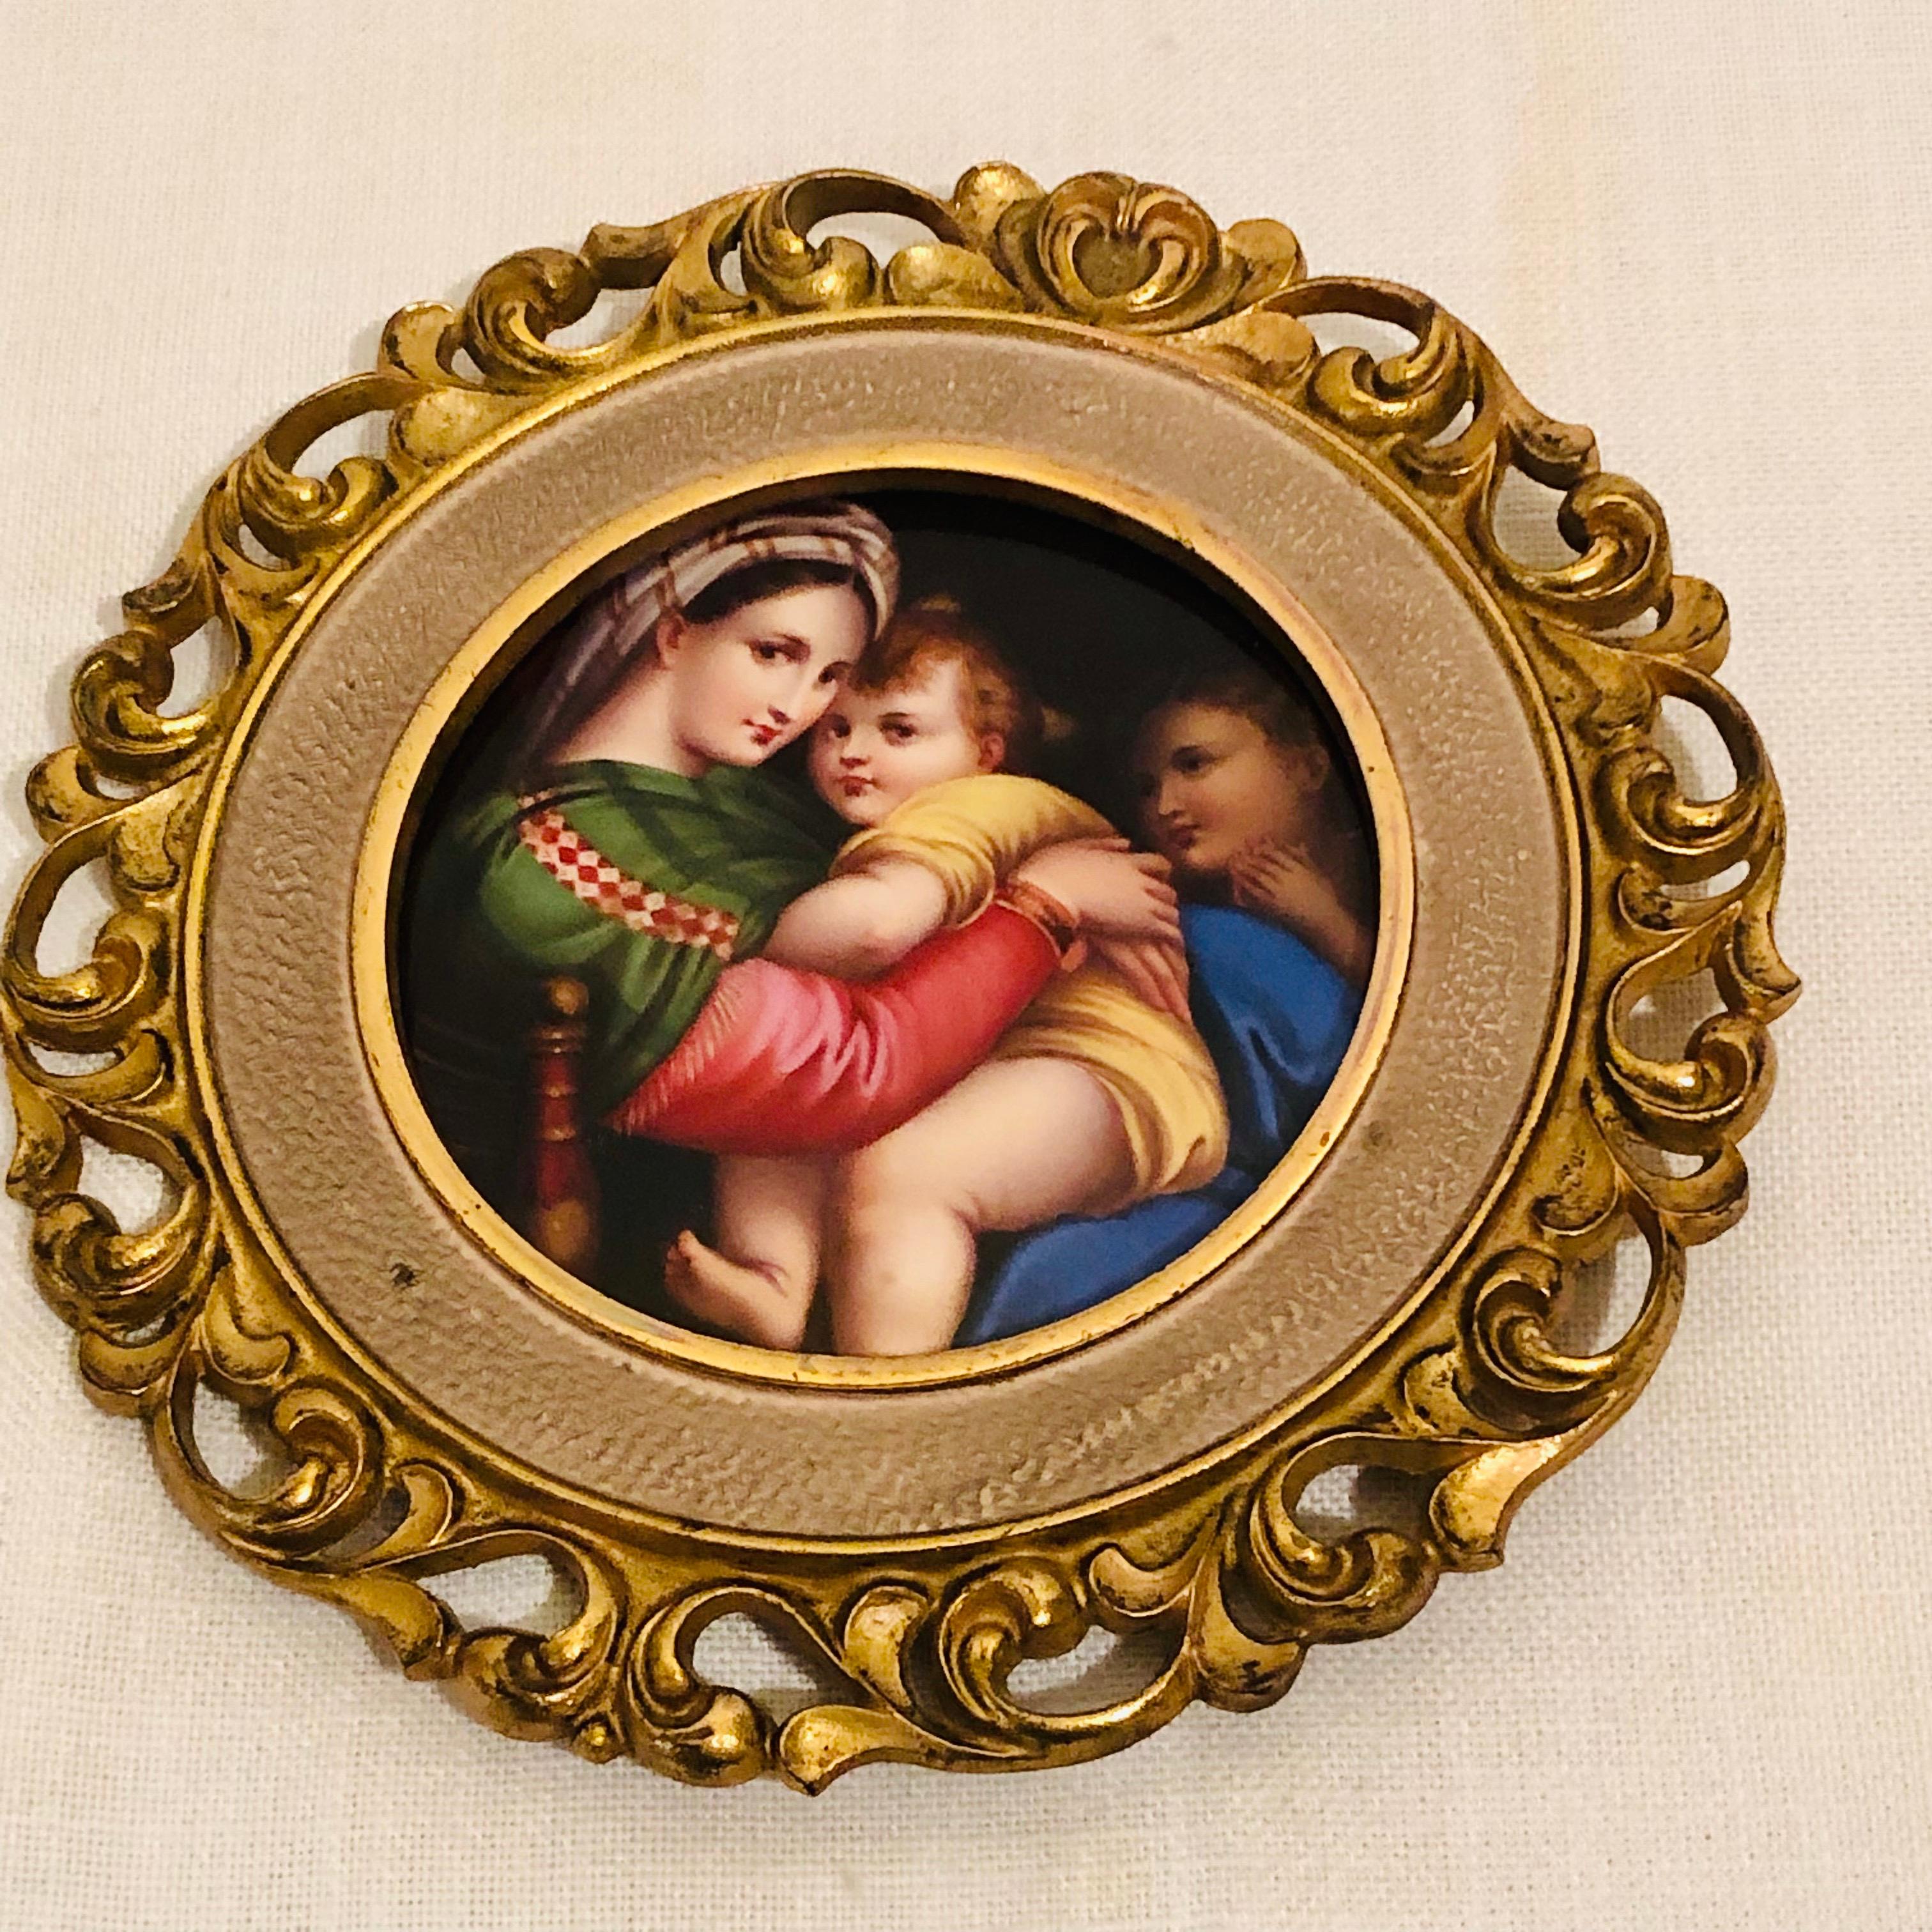 This is a beautifully painted KPM porcelain plaque after the famous painting of the Madonna of the Chair or Madonna della Sedia by Raphael, which was originally painted 1513-1514. Many of the gorgeous and sought after KPM plaques were copied by